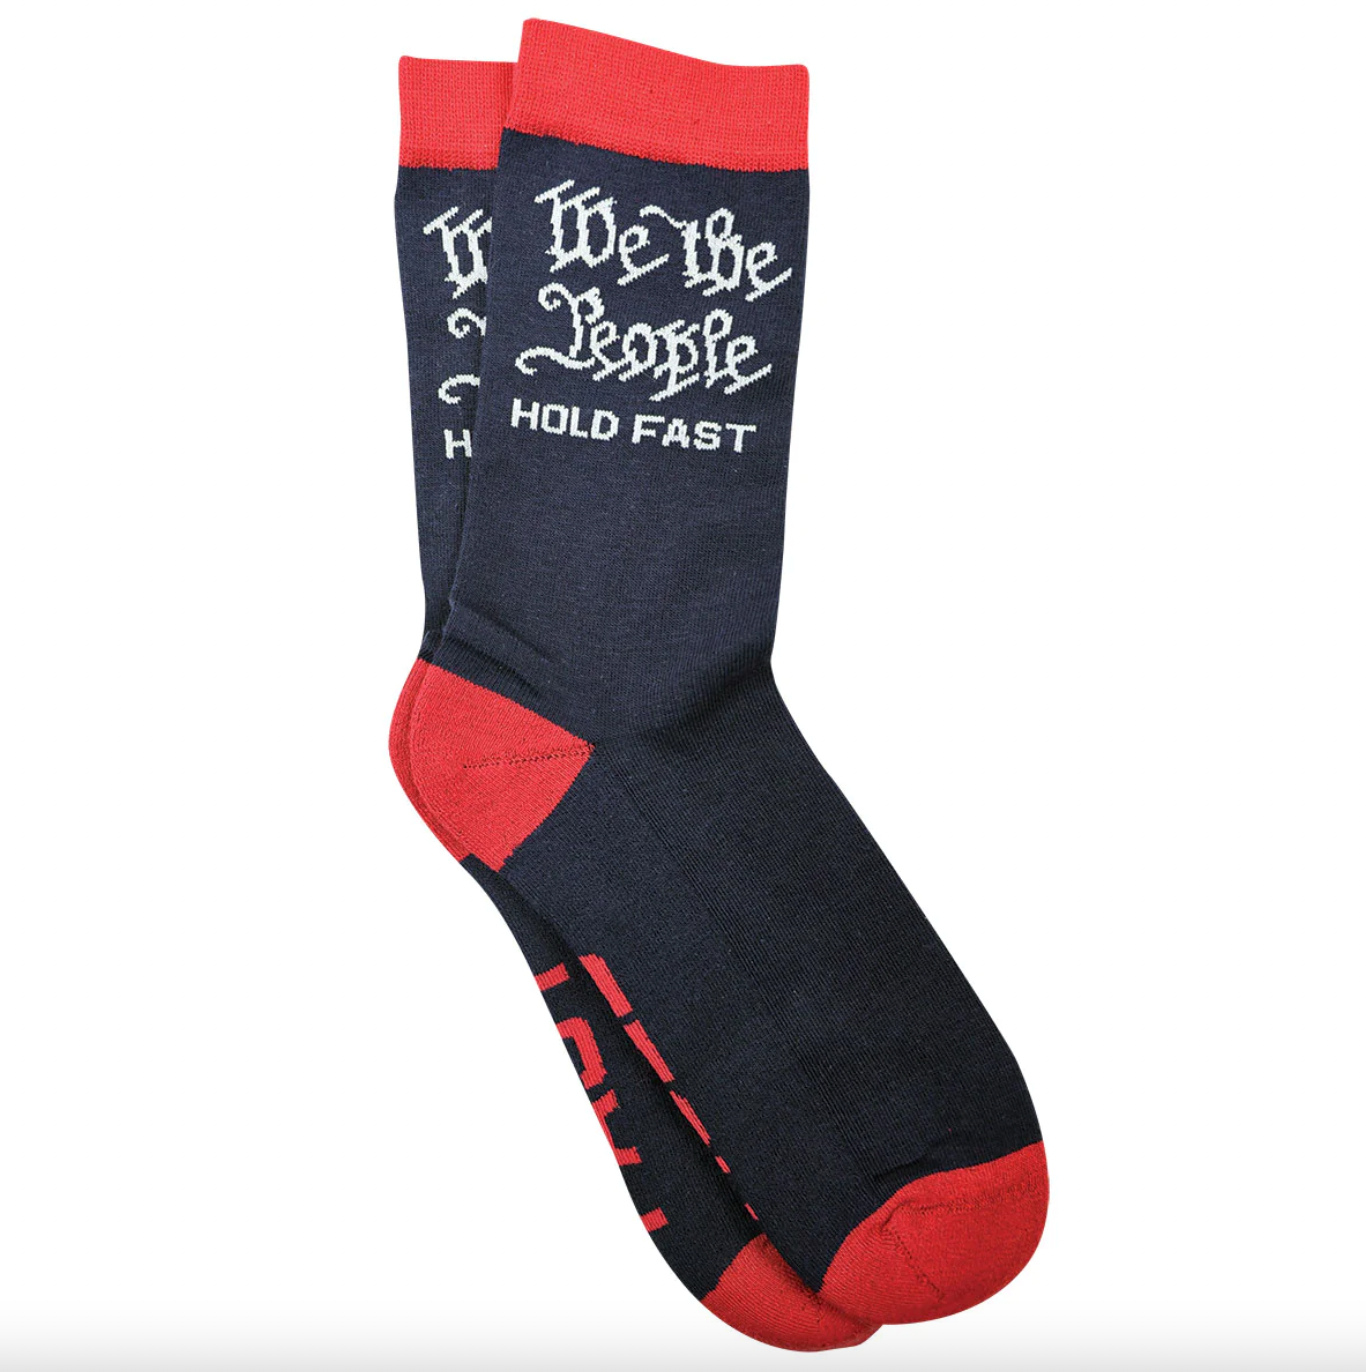 HOLD FAST SOCKS WE THE PEOPLE